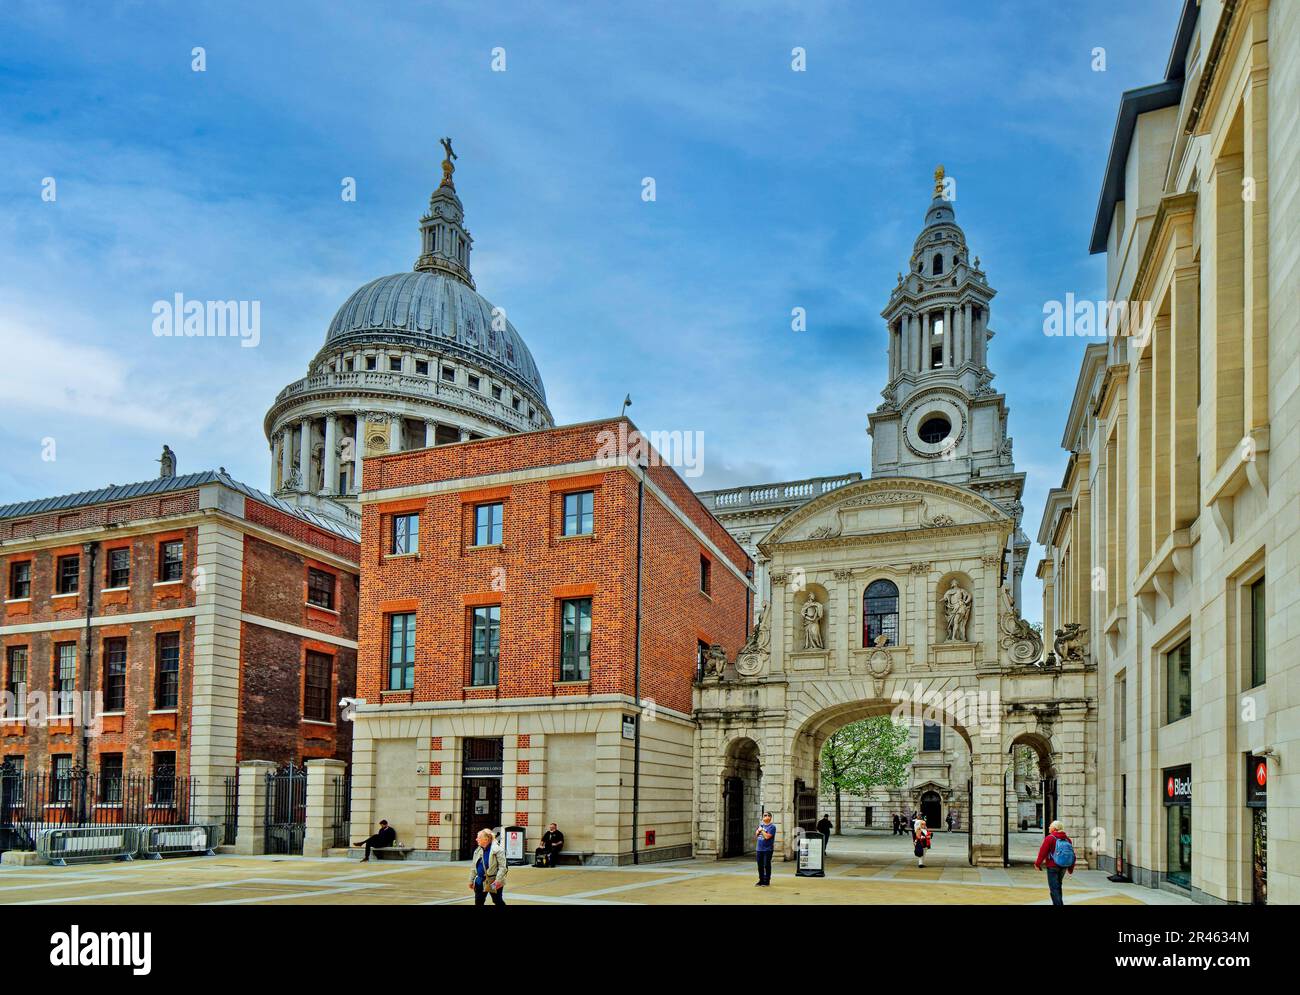 London St Pauls Paternoster Square and Temple Bar Gate a Wren-designed stone archway Stock Photo